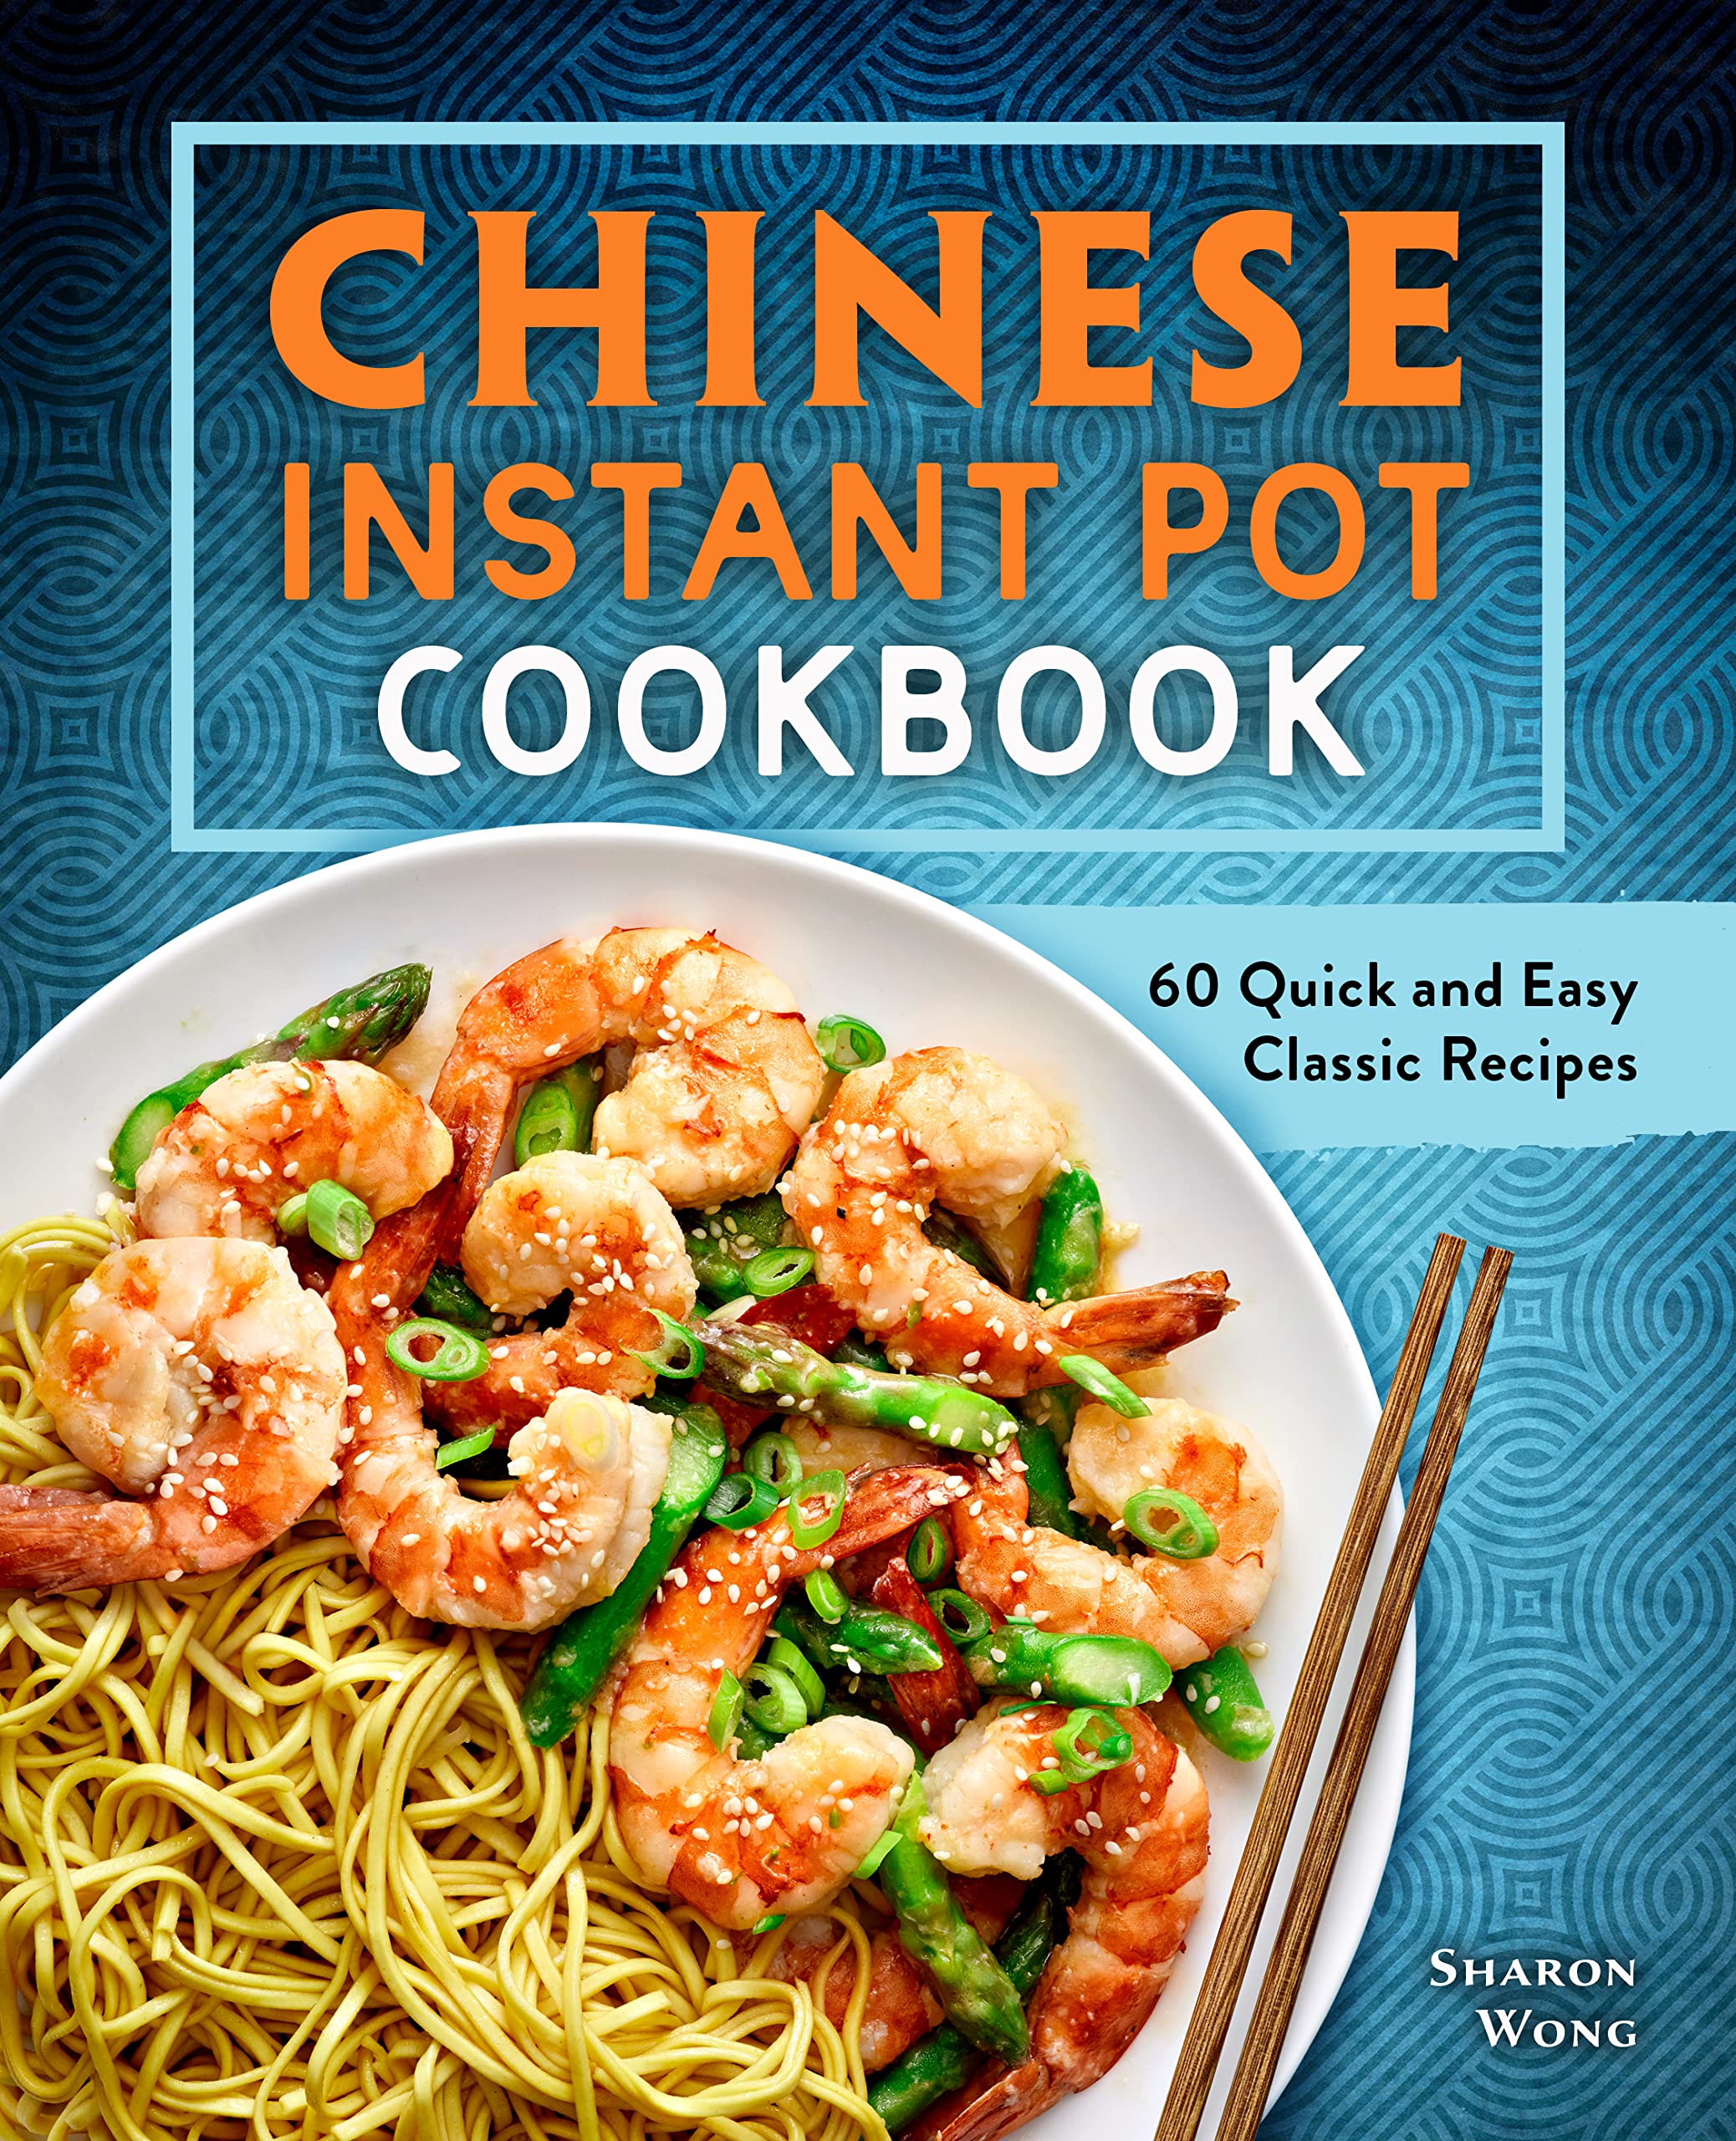 Chinese Instant Pot Cookbook: 60 Quick and Easy Classic Recipes *Signed* (Sharon Wong)